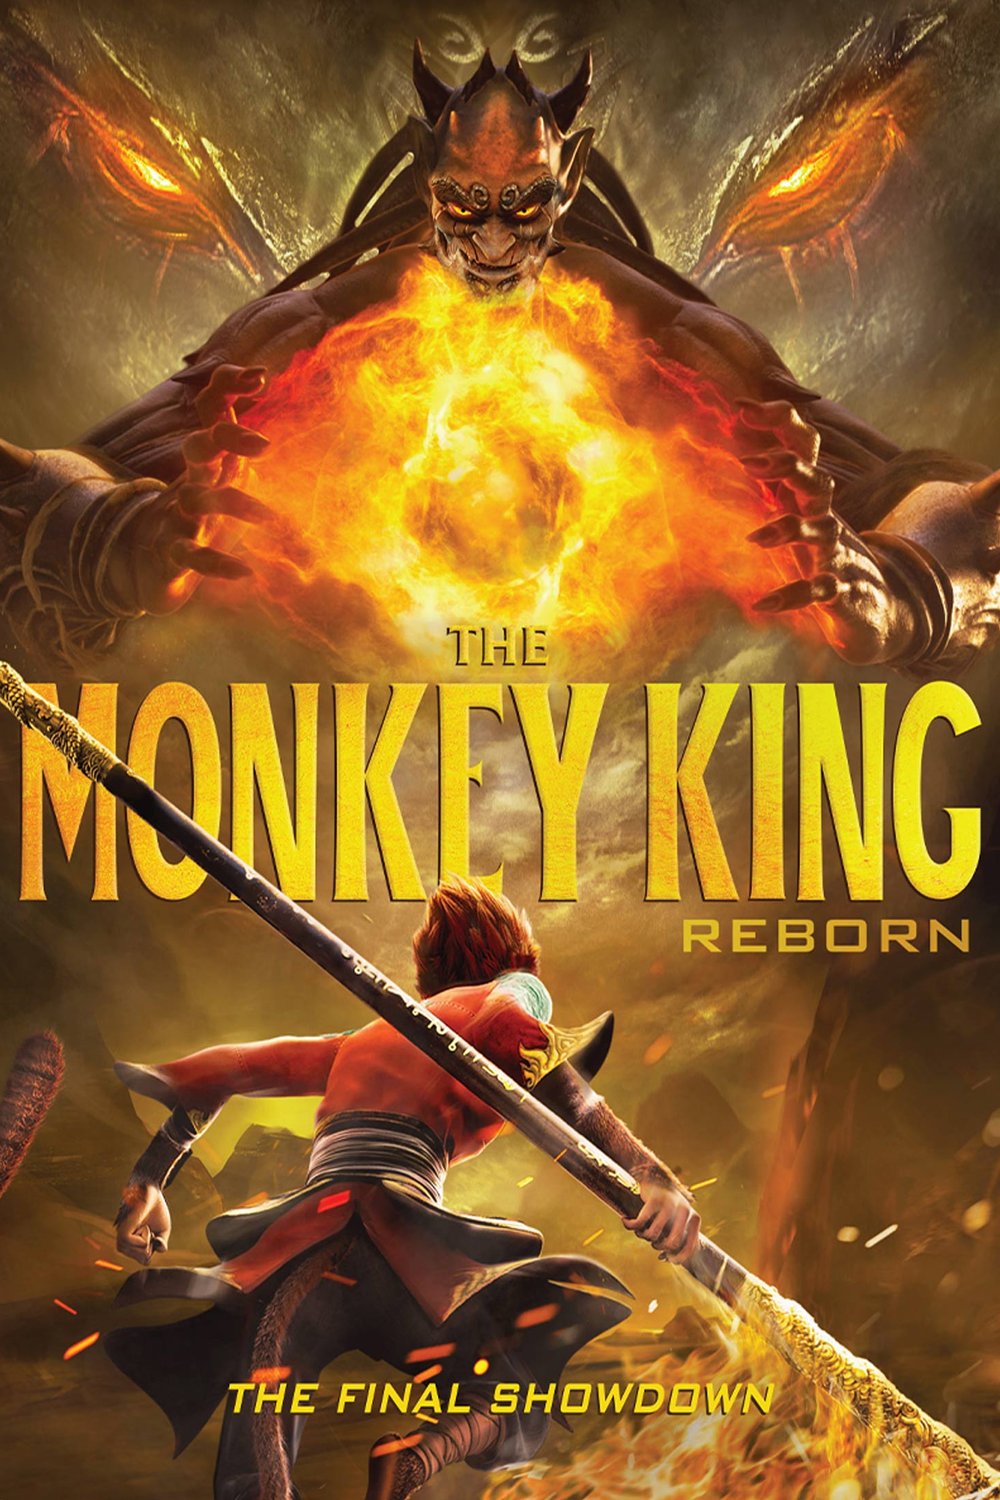 Chinese poster of the movie Monkey King Reborn